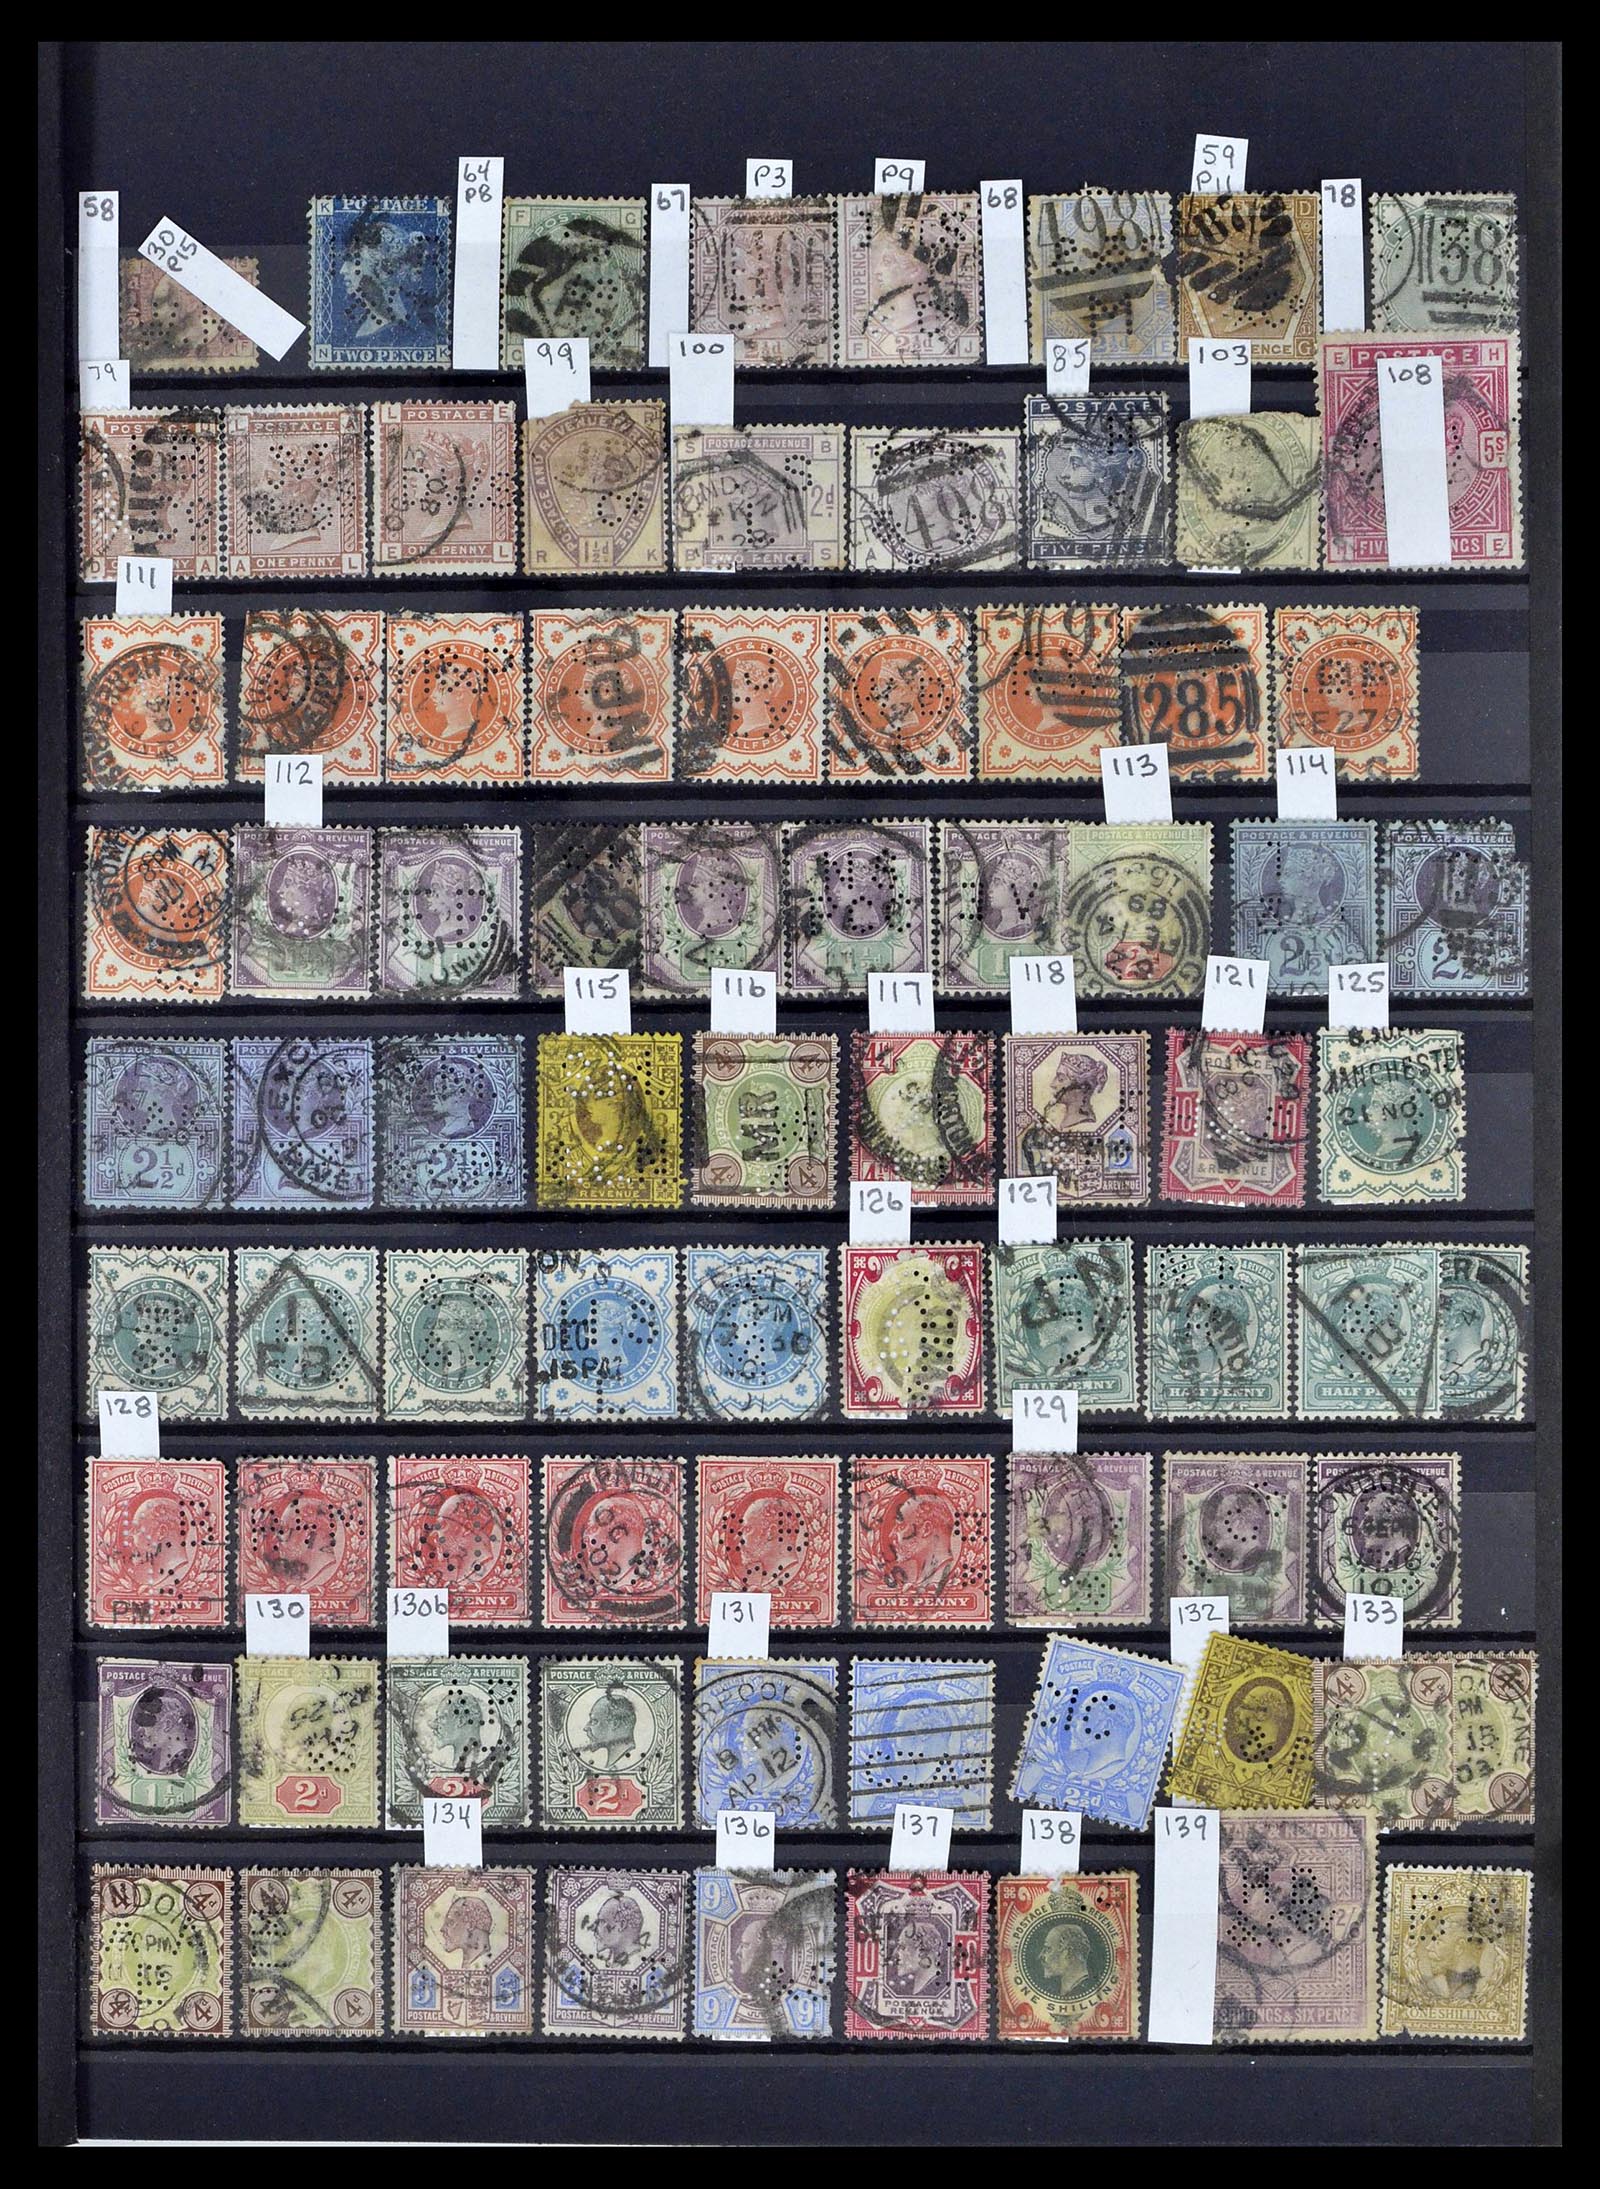 39196 0110 - Stamp collection 39196 Great Britain 1844-1955.